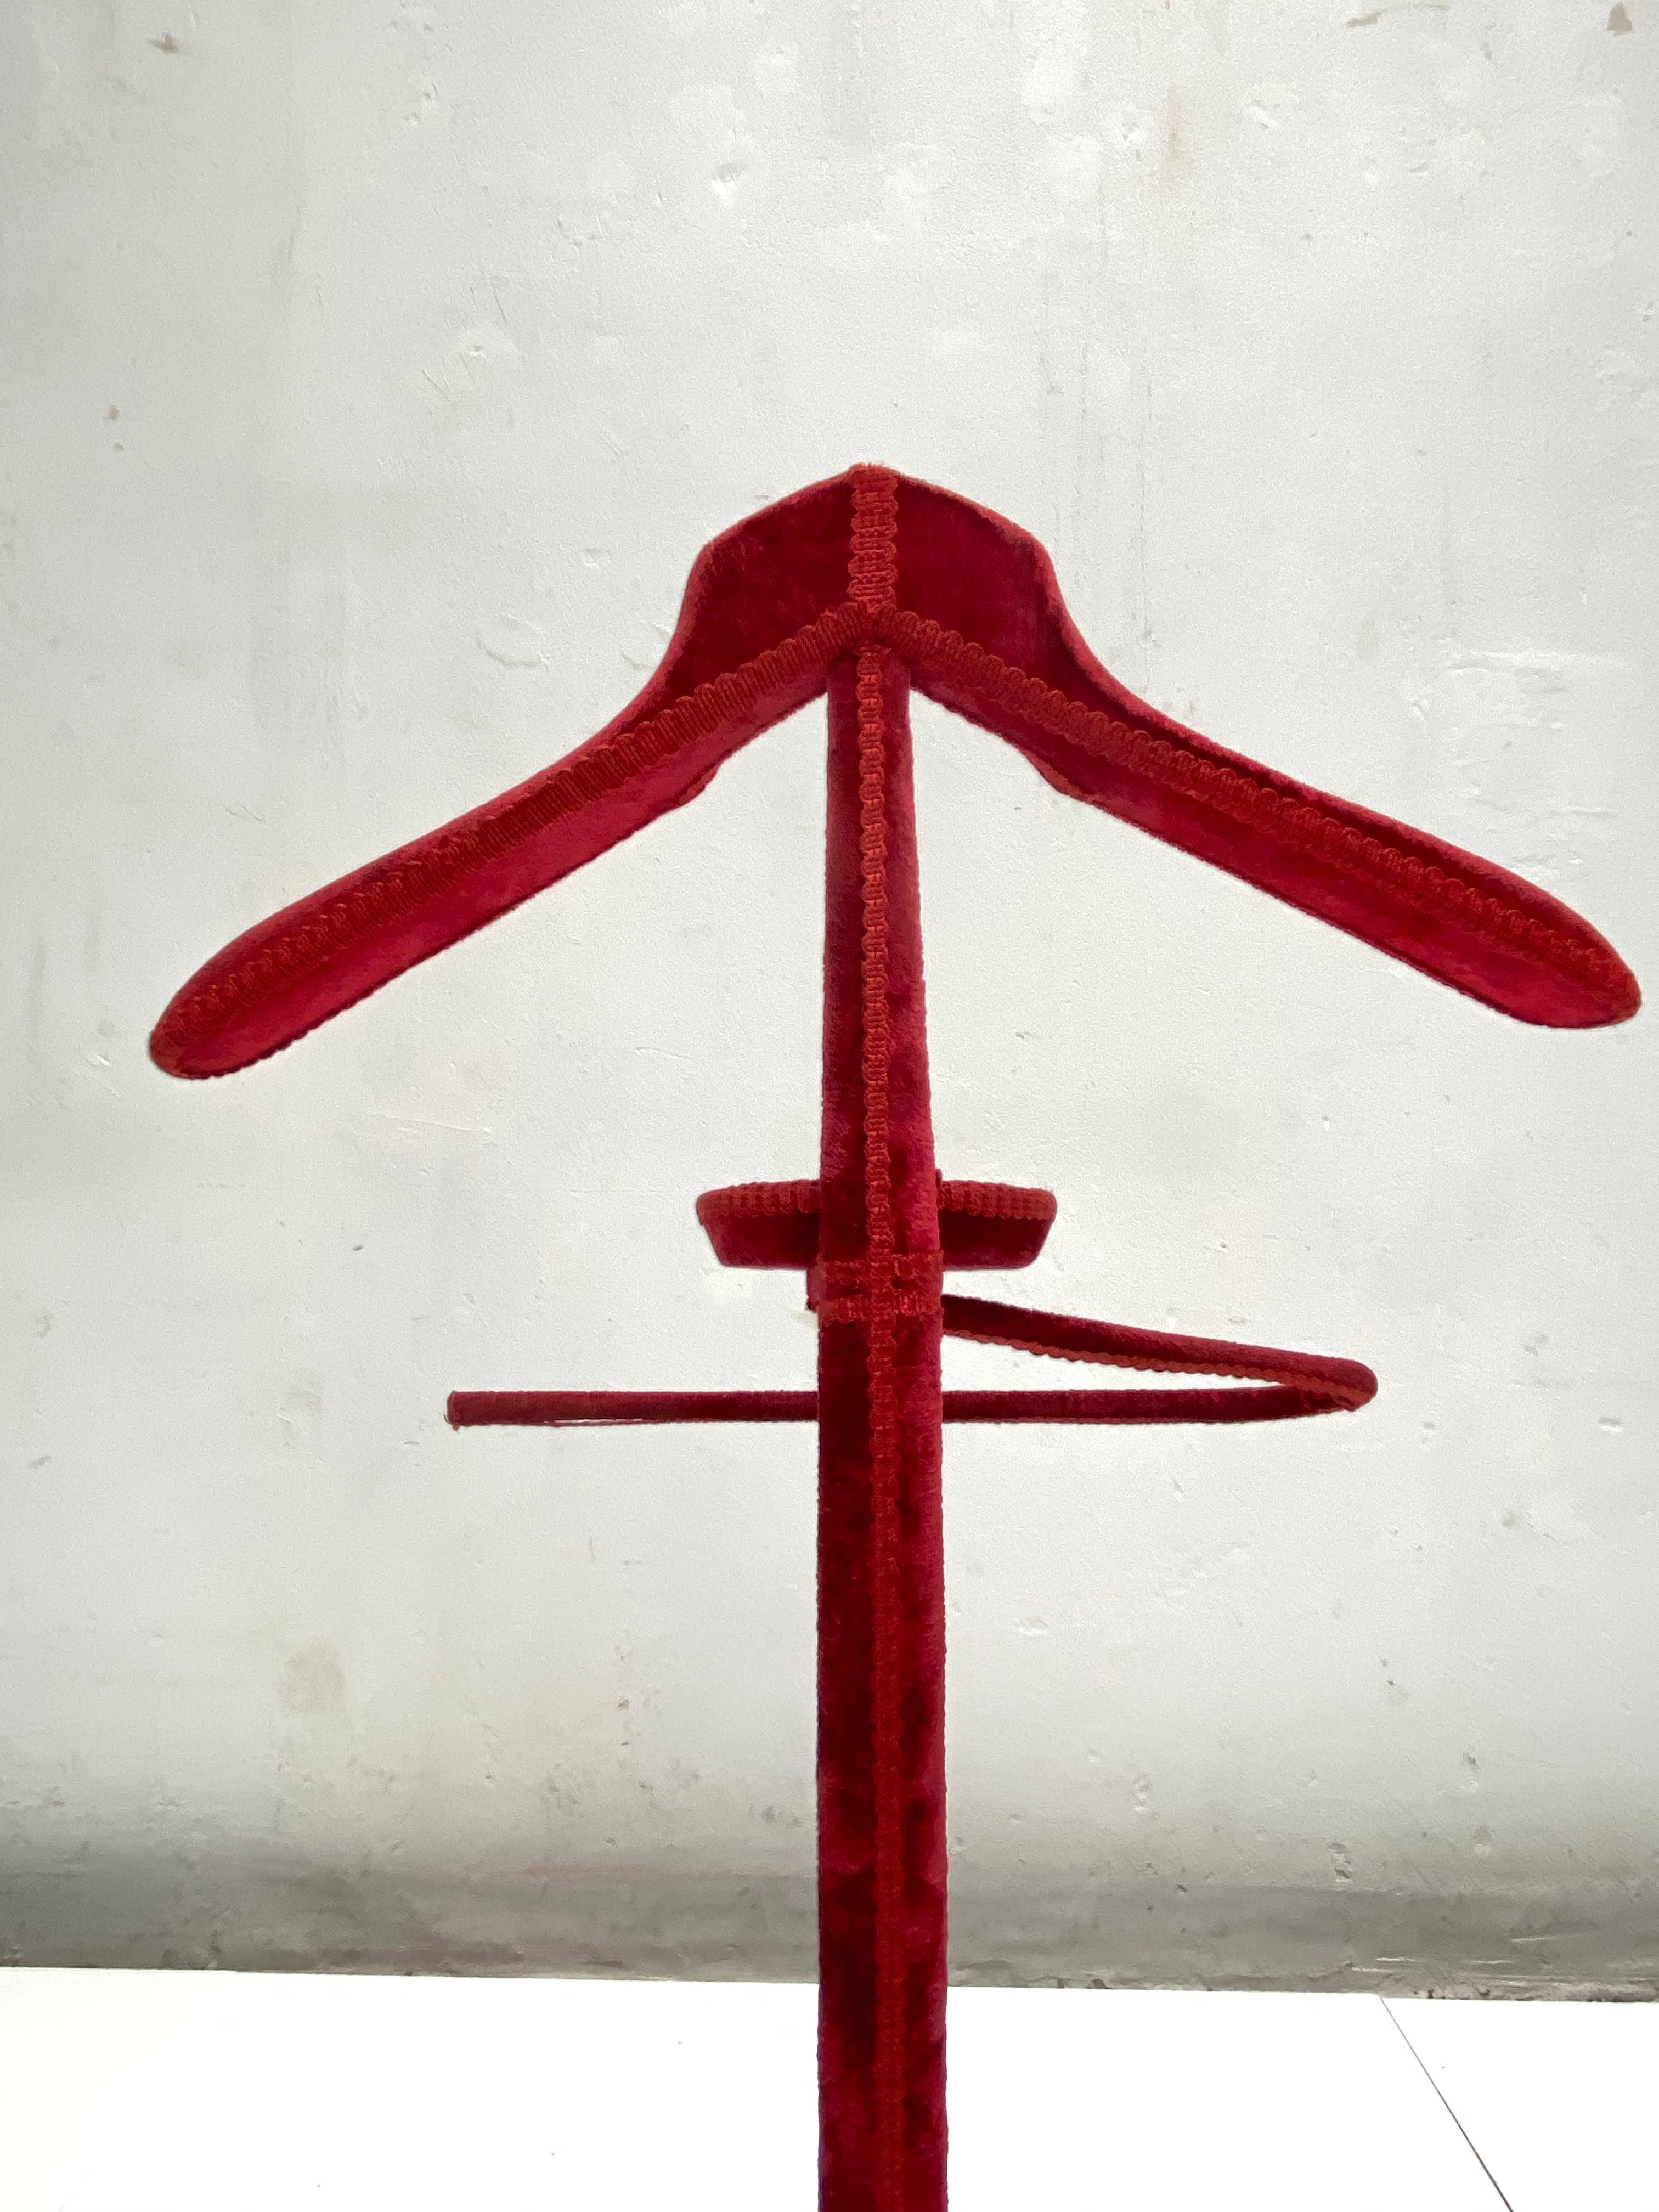 A stylish 1960s Italian DressBoy or valet stand upholstered in its original red velvet upholstery

Most likely it was produced by Reguitti Italy in the 1960s but unfortunately we can't find any manufacturing markings

A lot of craftsmanship went